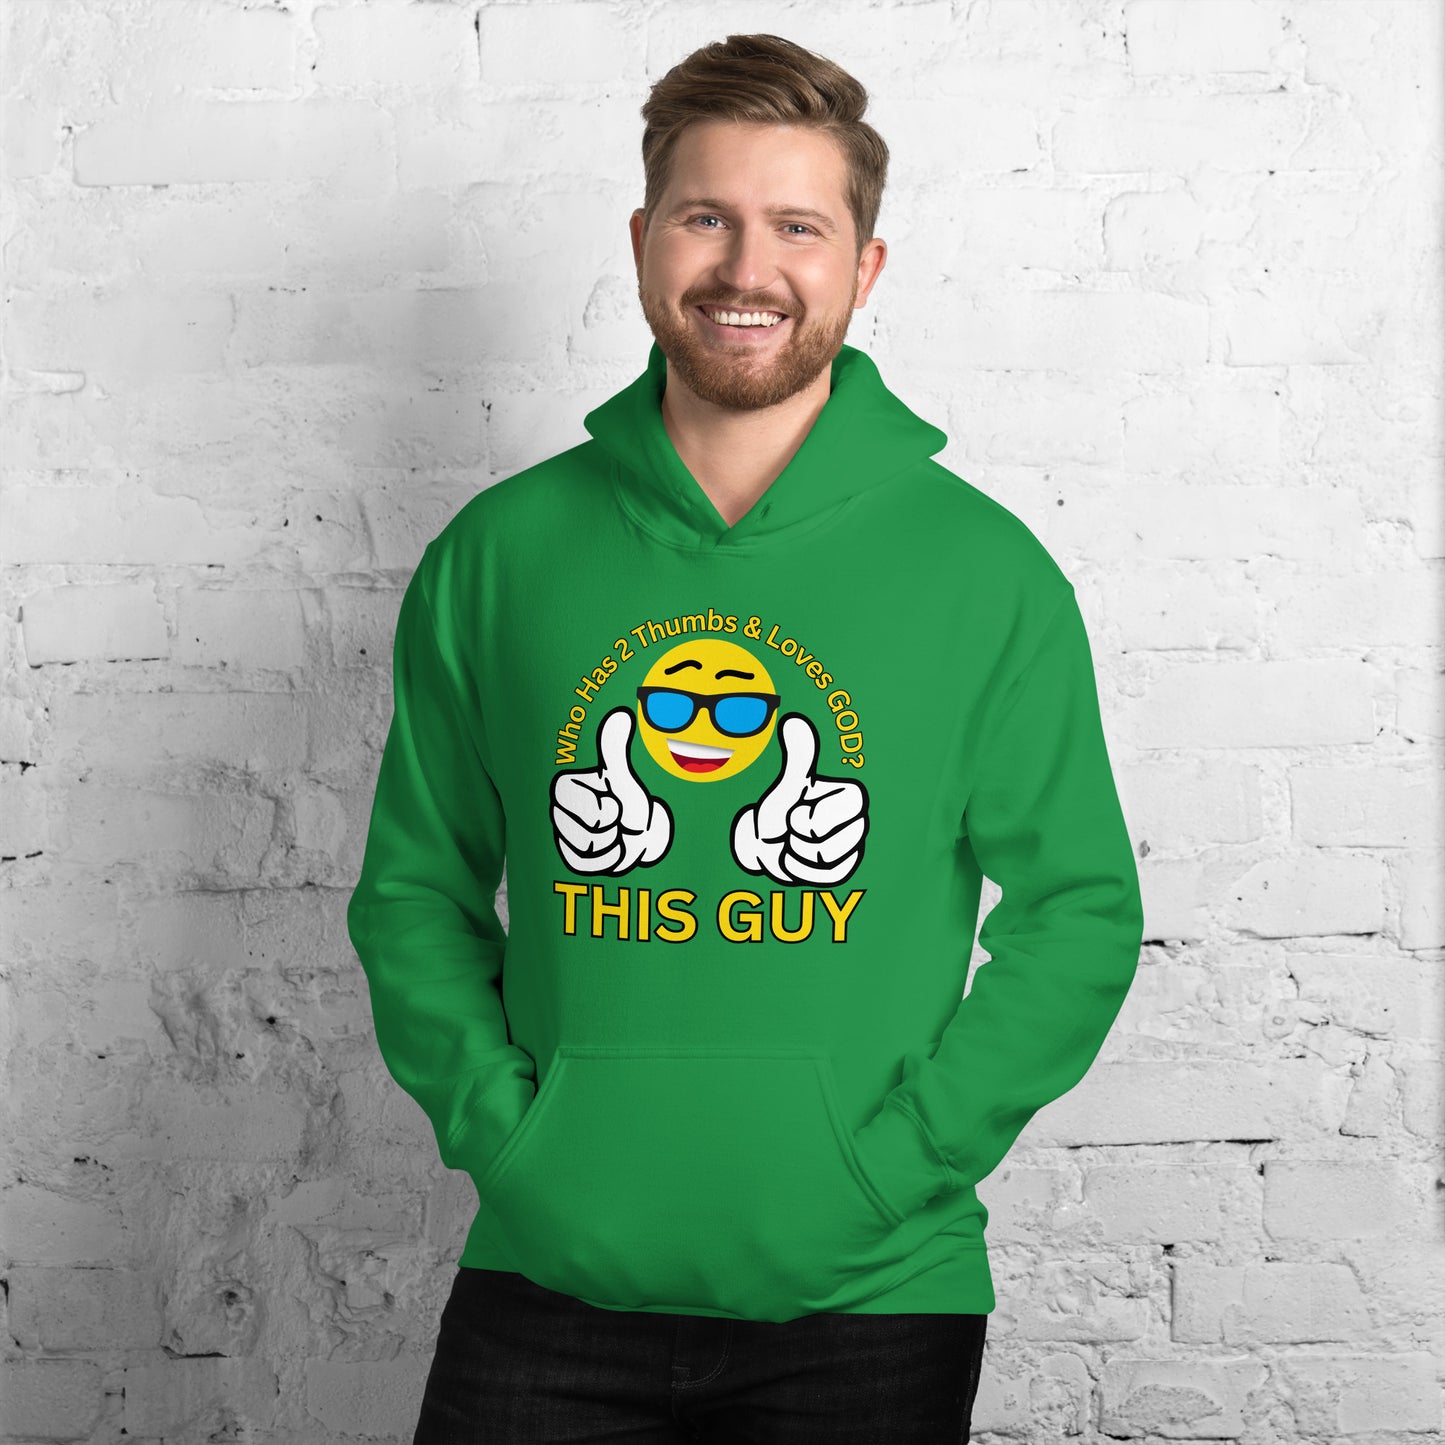 Who Has 2 Thumbs & Loves GOD? THIS GUY Unisex Hoodie